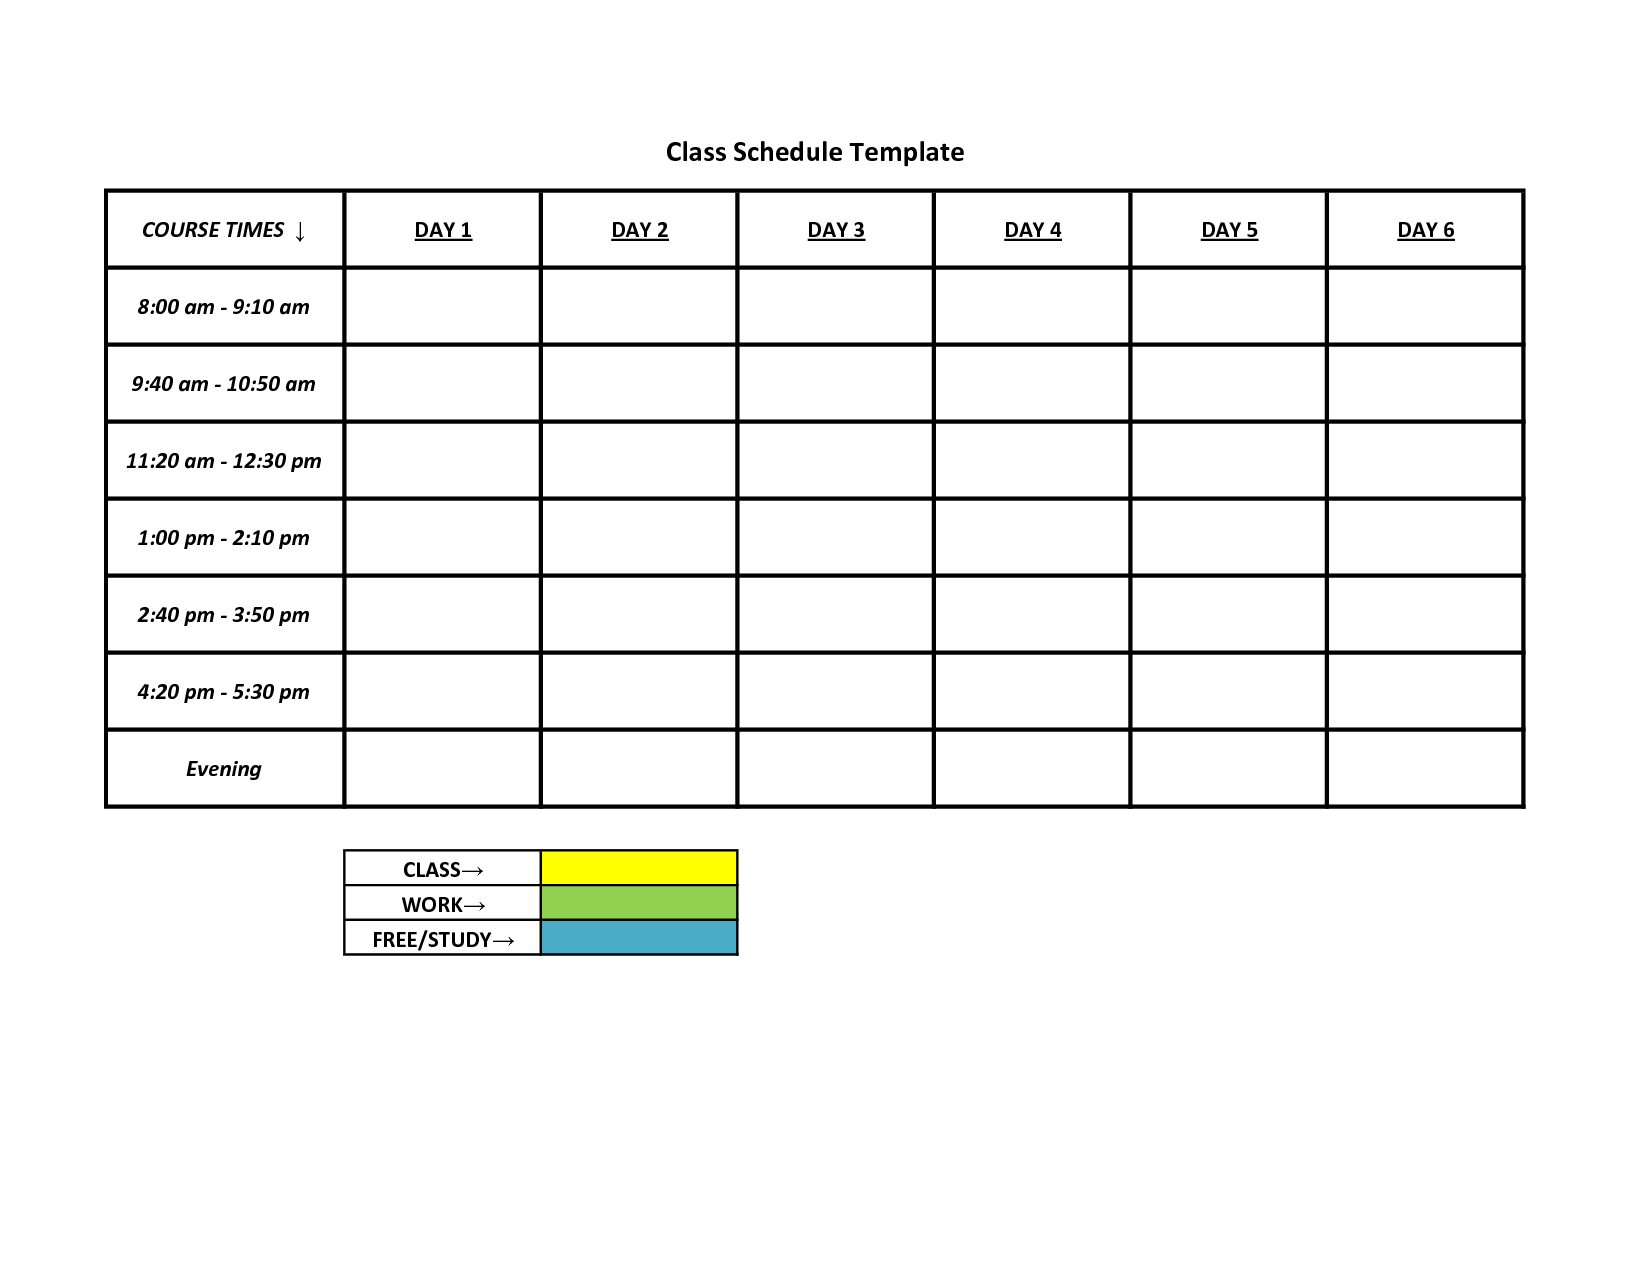 Spreadsheet Work Schedule Template Intended For Employee Shift Scheduling Spreadsheet And Free Sample Work Schedule